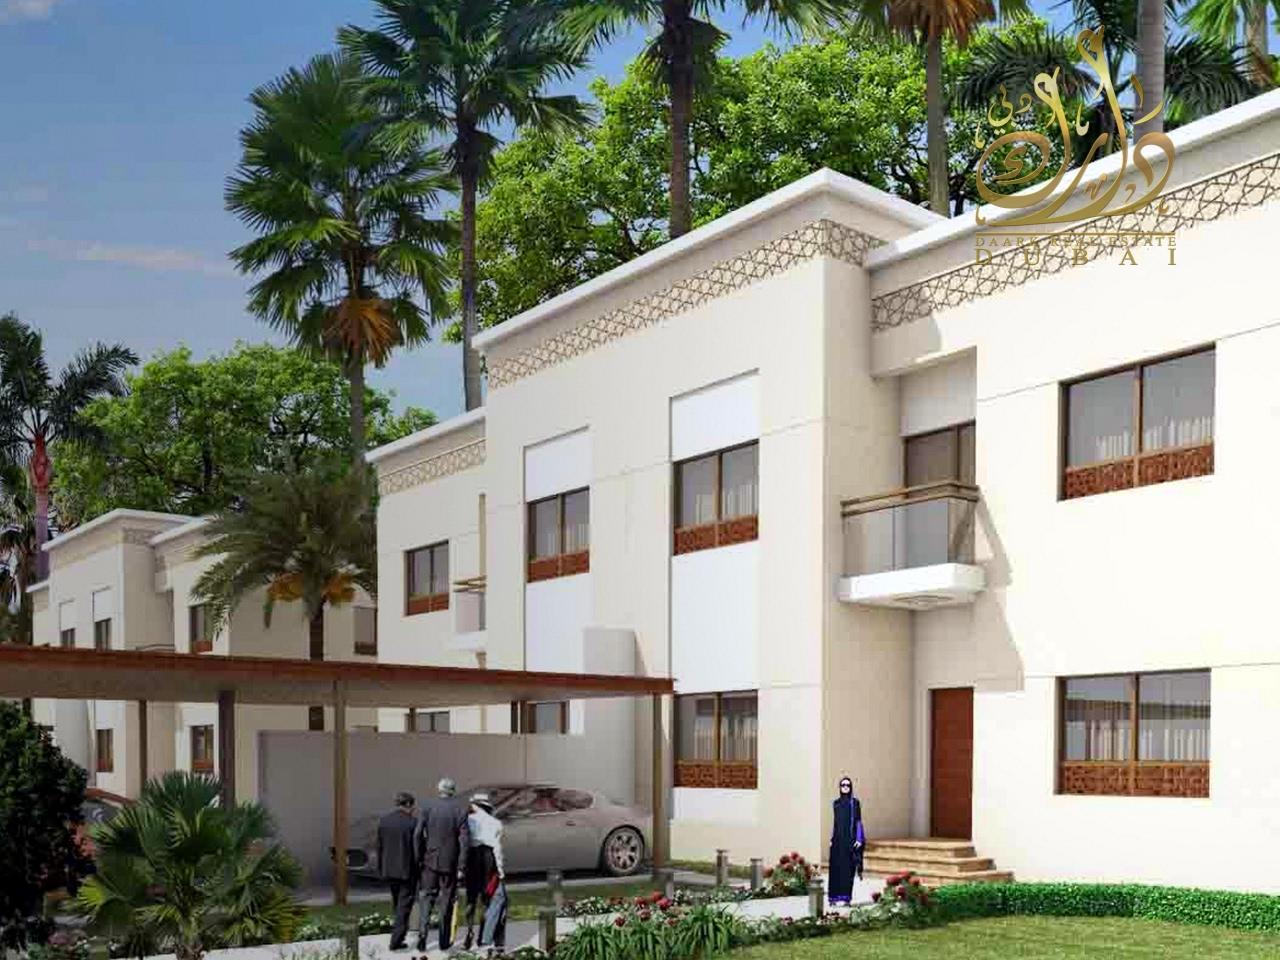 3 bed, 4 bath Villa for sale in Sharjah Garden City, Sharjah for price AED 1850000 